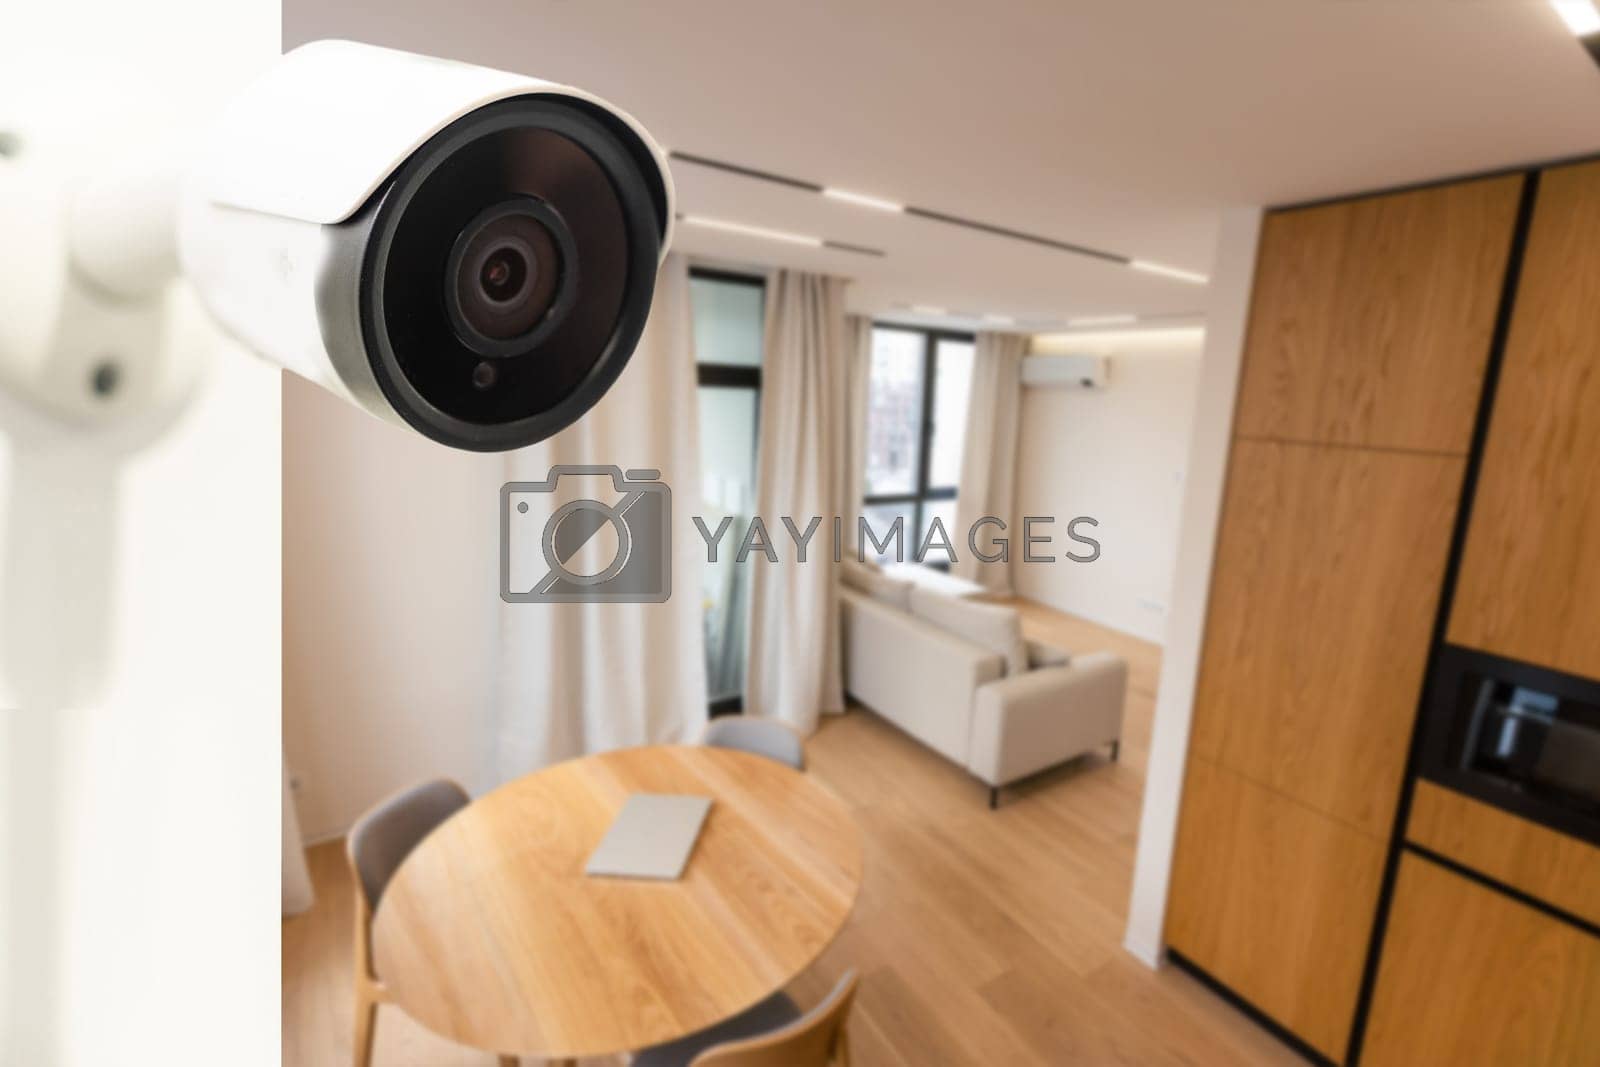 Royalty free image of Cctv camera system, home security technology outside security by Andelov13